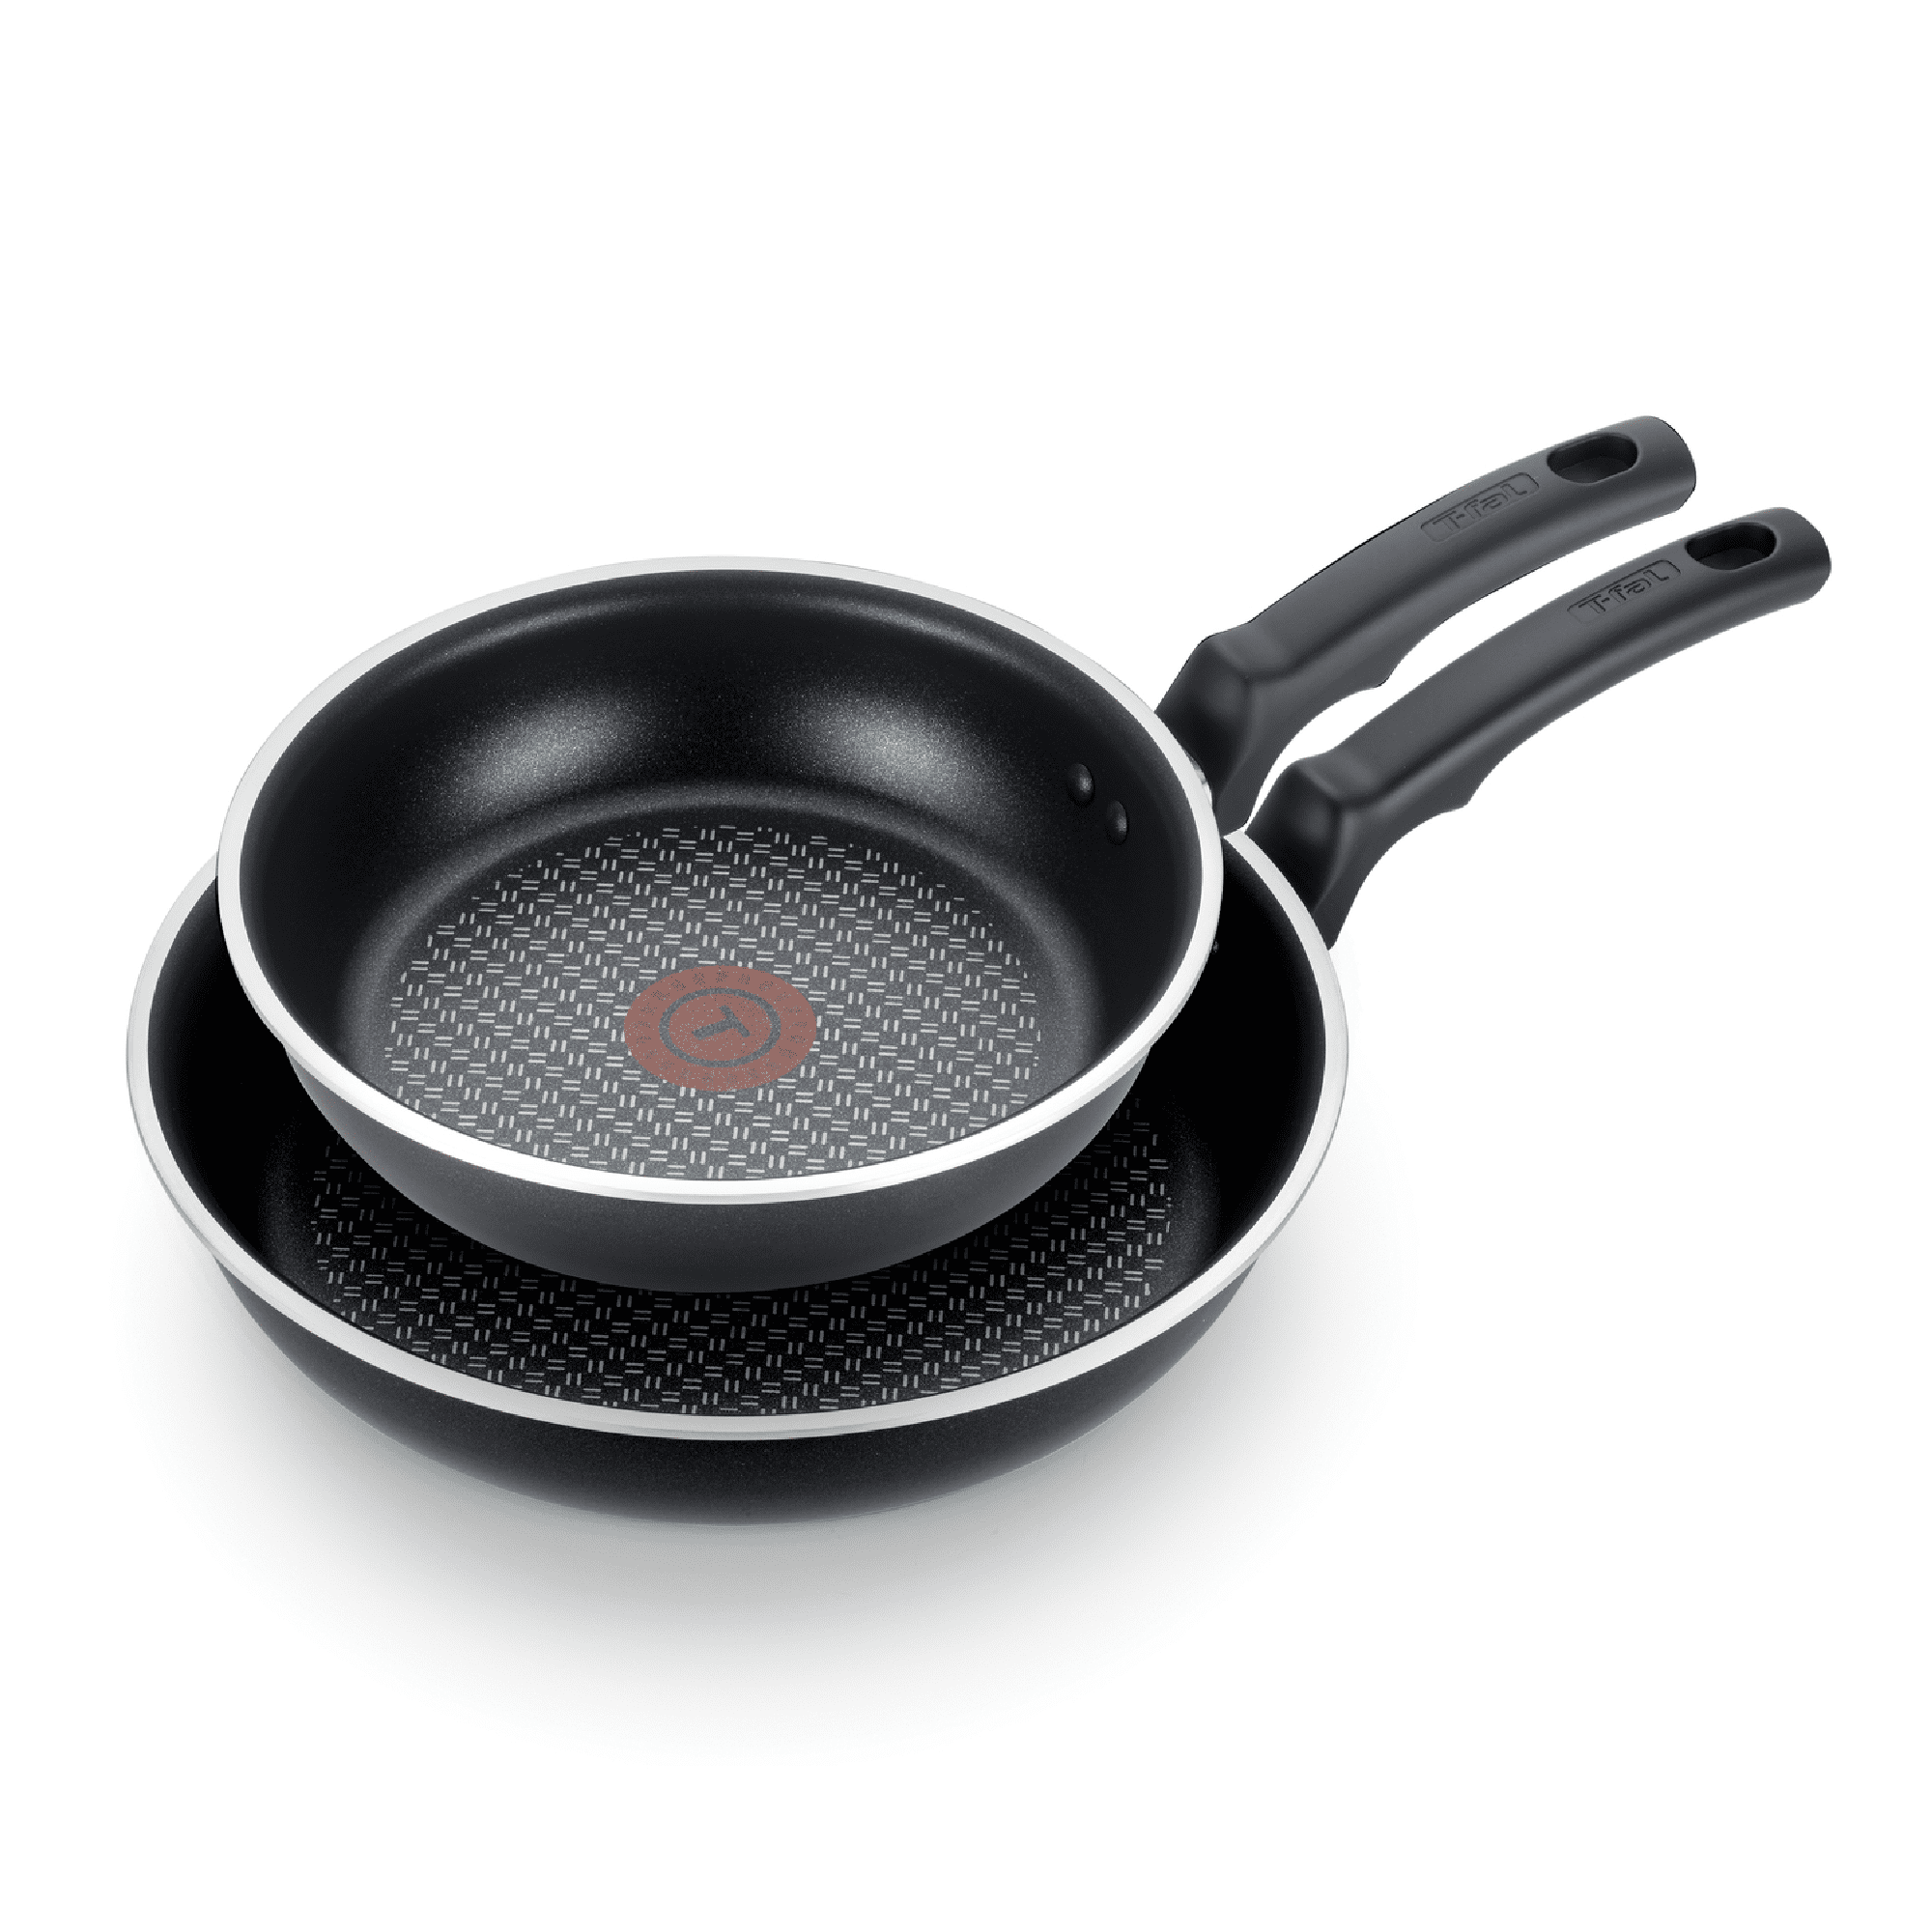 T-fal Cook & Strain Nonstick Cookware Set, 2 piece Fry Pan Set, 9.5 and 11  inch, Black